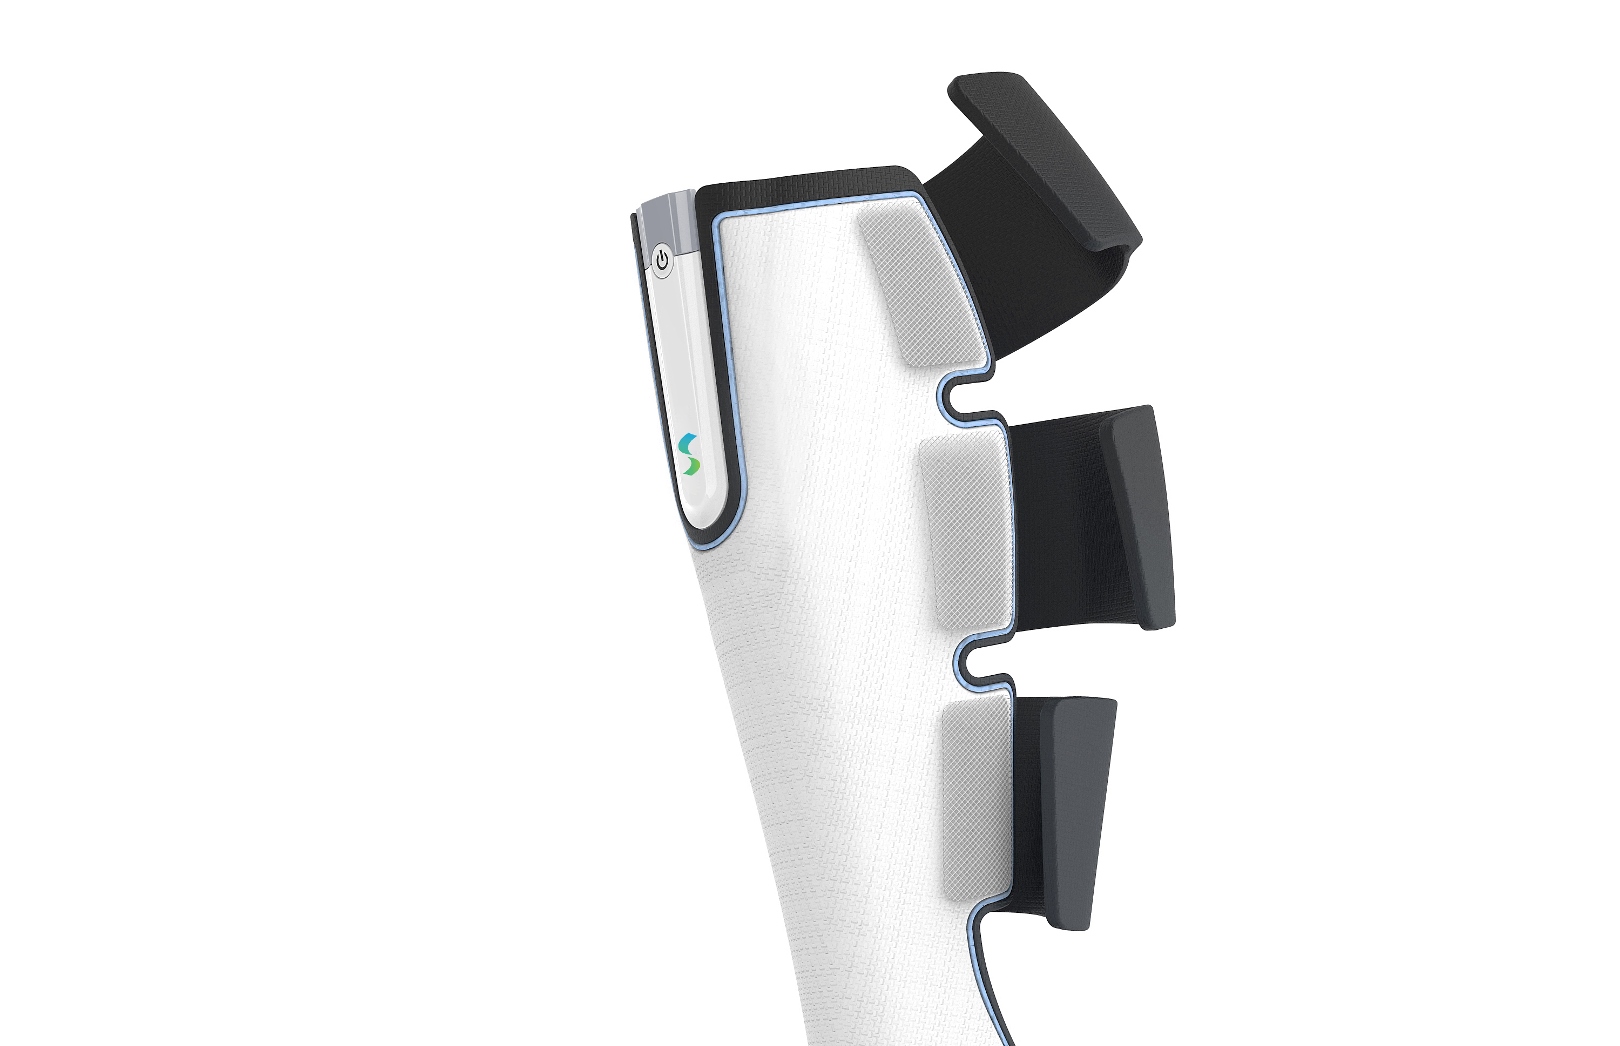 Smart compression stocking goes on easy and feels comfy - ISRAEL21c